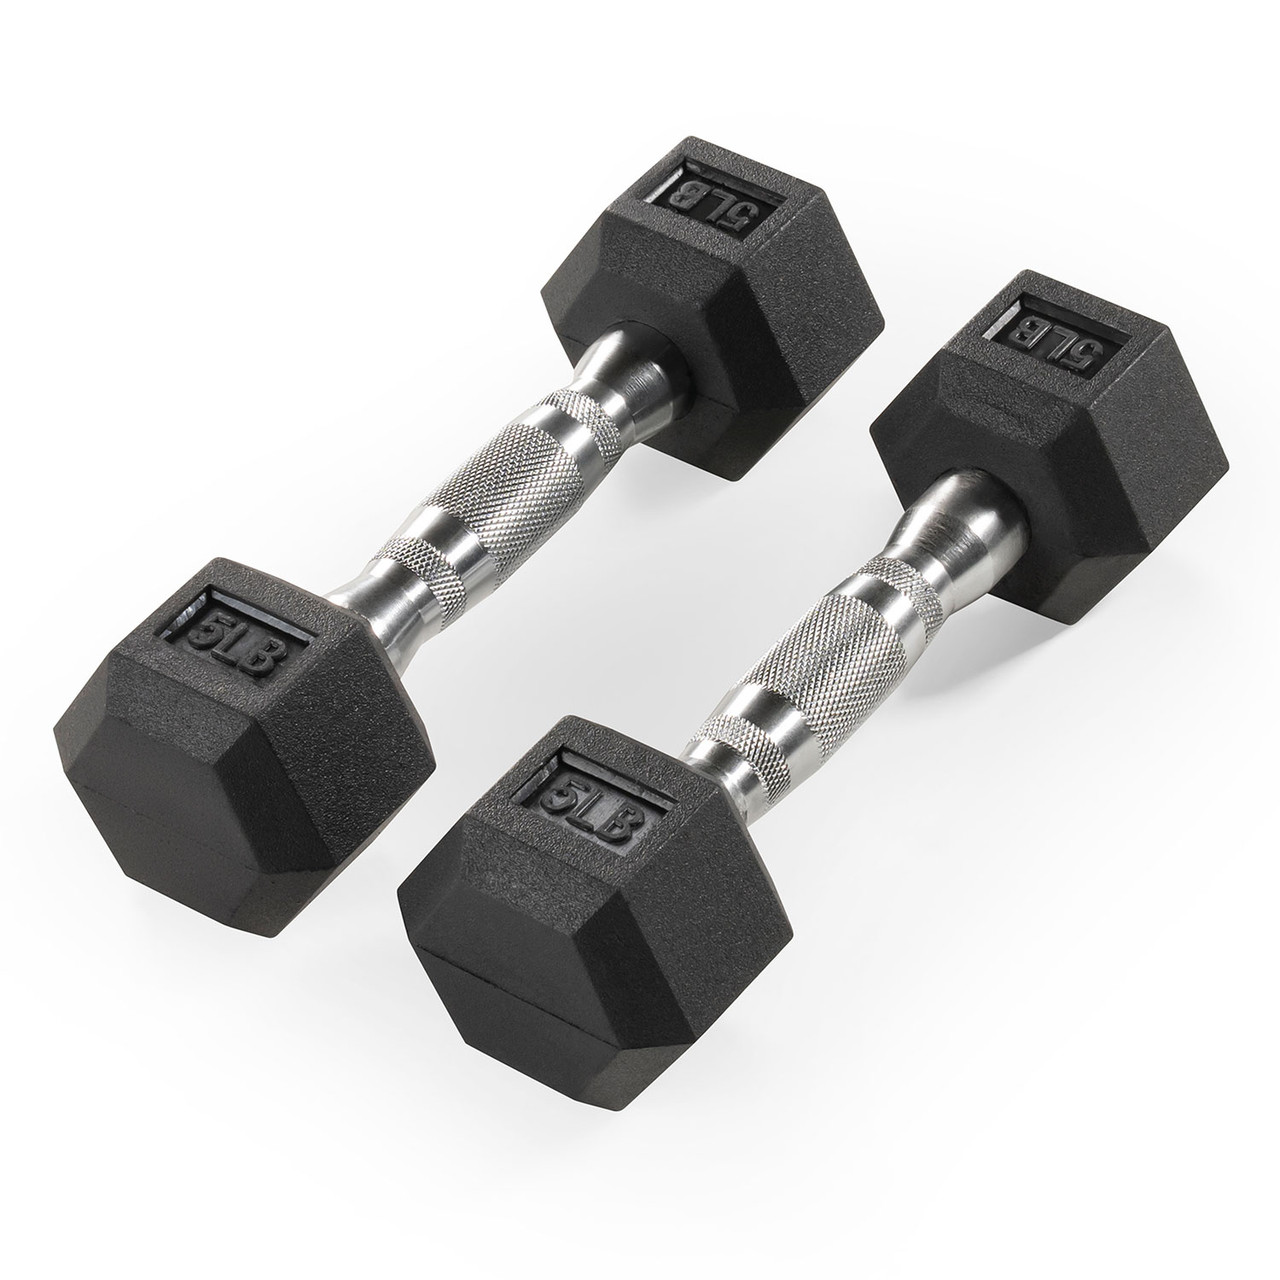 Marcy 5lb Rubber Hex Pair of Dumbbells